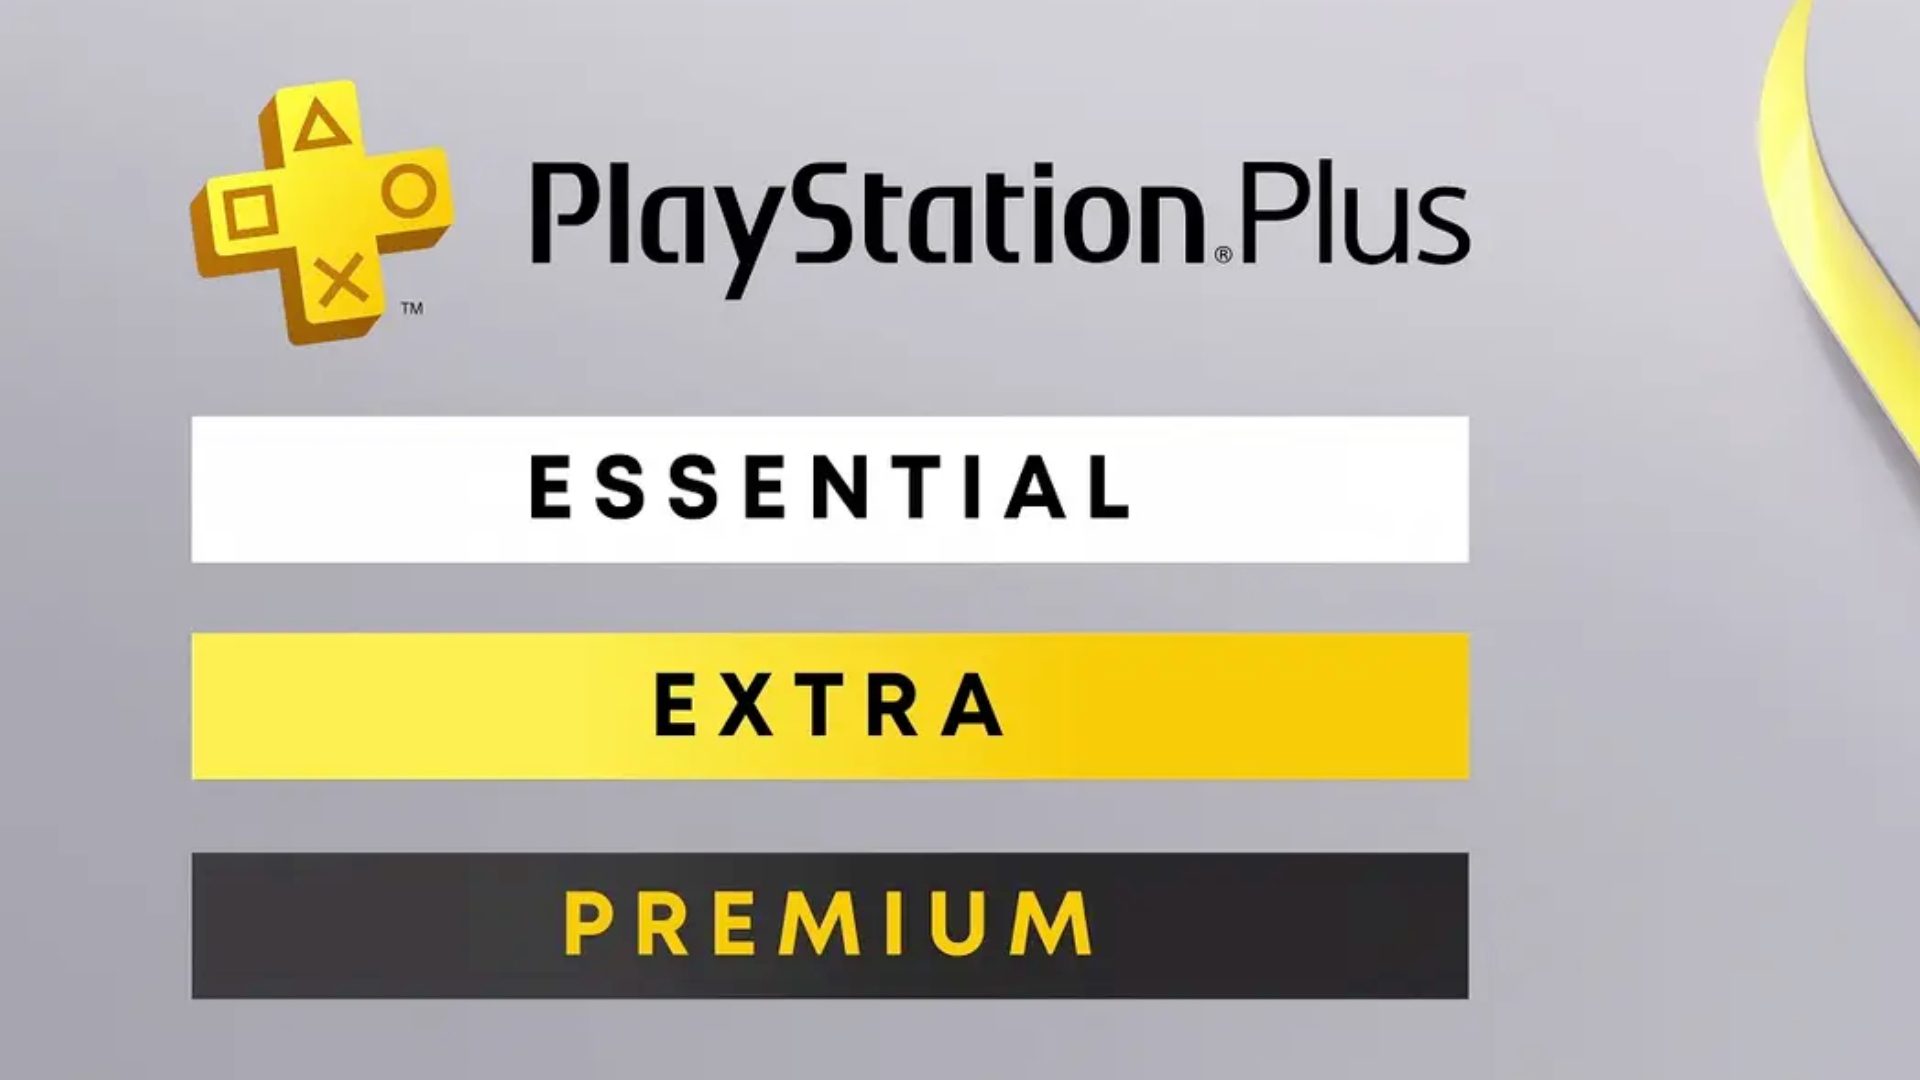 PlayStation Plus Deals: Get Access to Sony's Subscription Offering for Less  - CNET